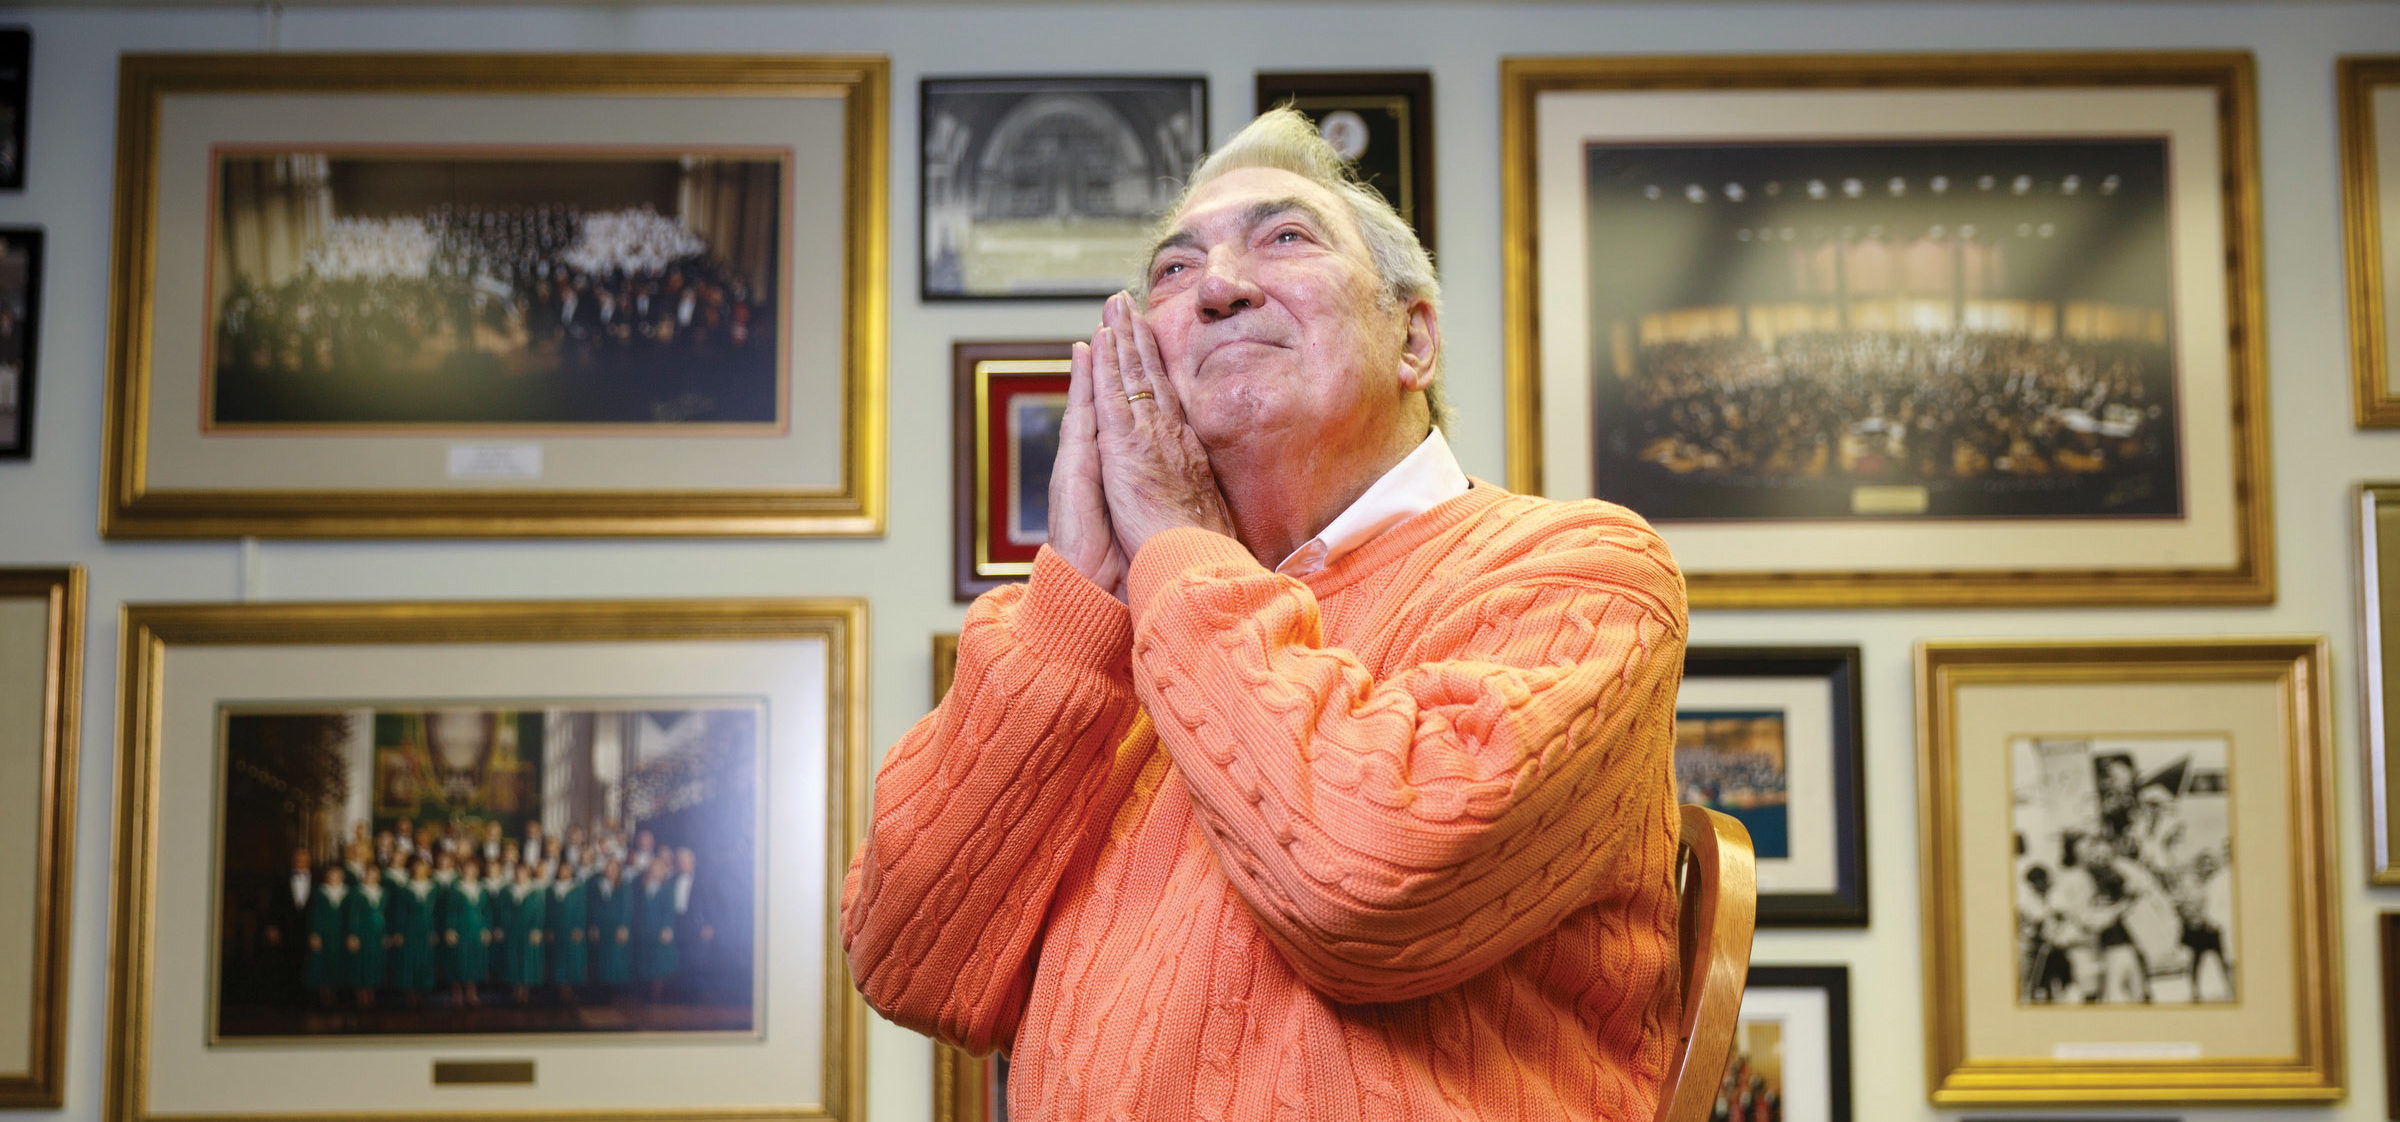 Glenn Draper in his office with memories of his career as a choral director in 2016.